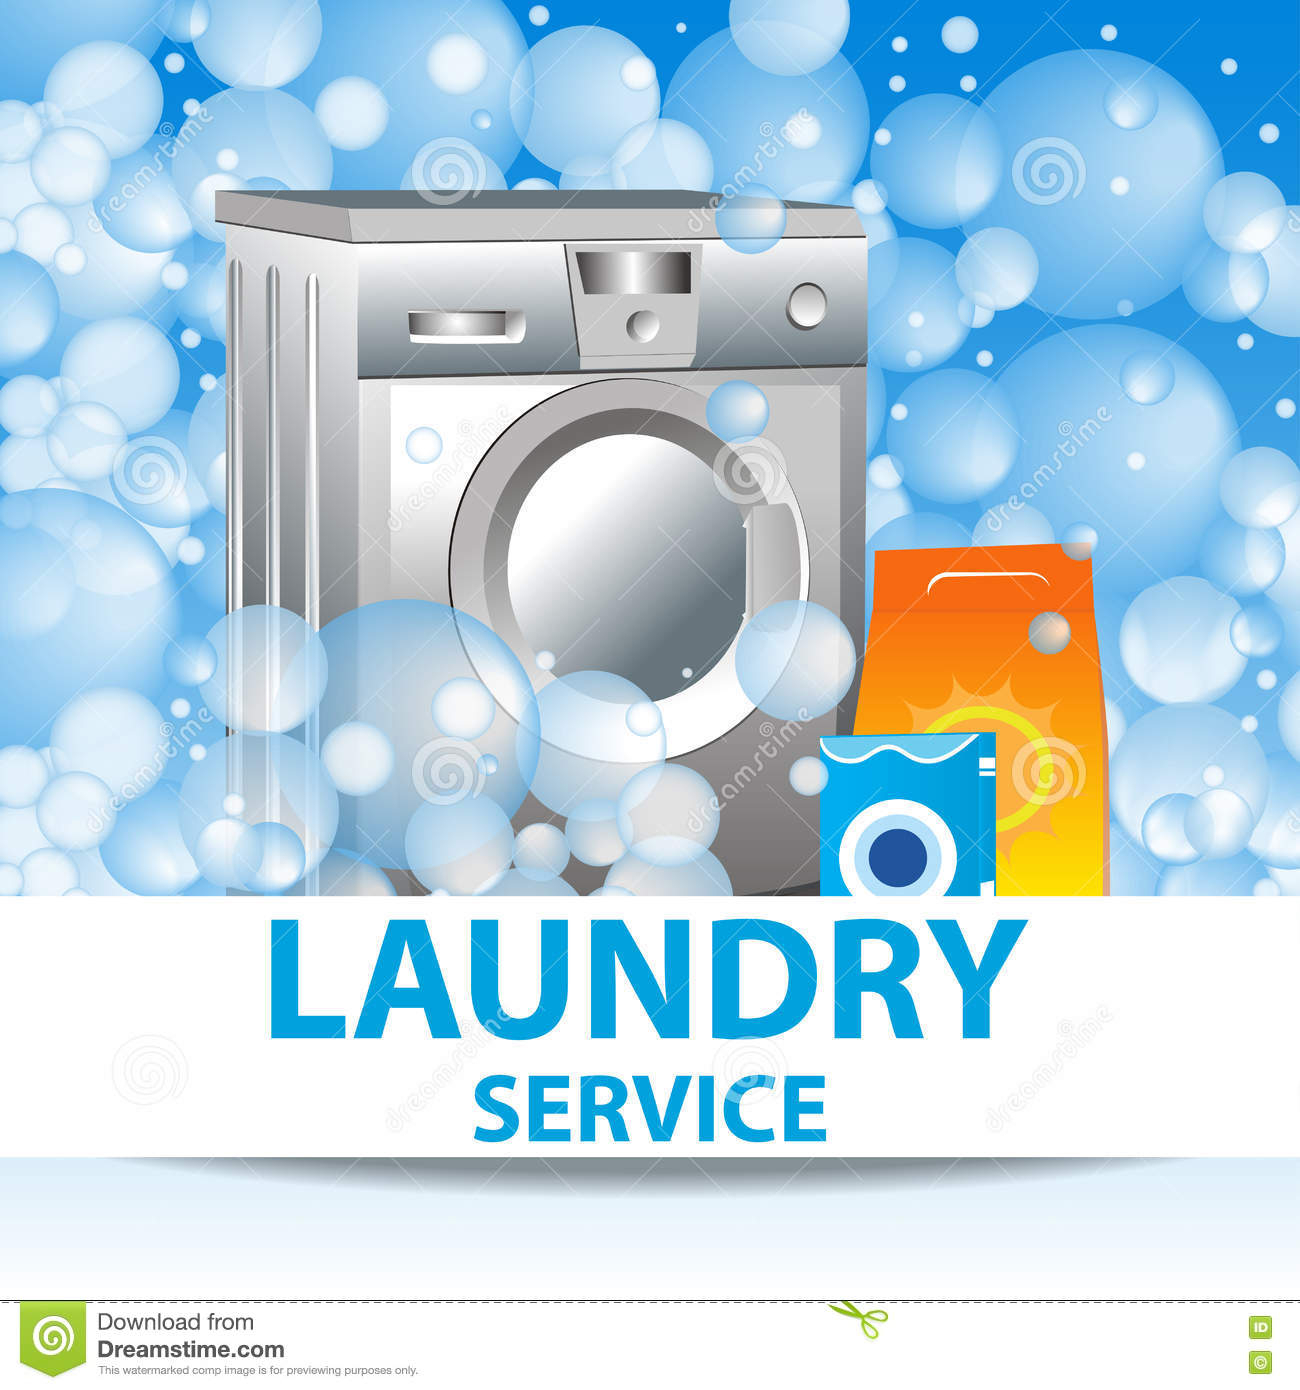 Laundry Service. Poster Template For House Cleaning Services In House Cleaning Services Flyer Templates